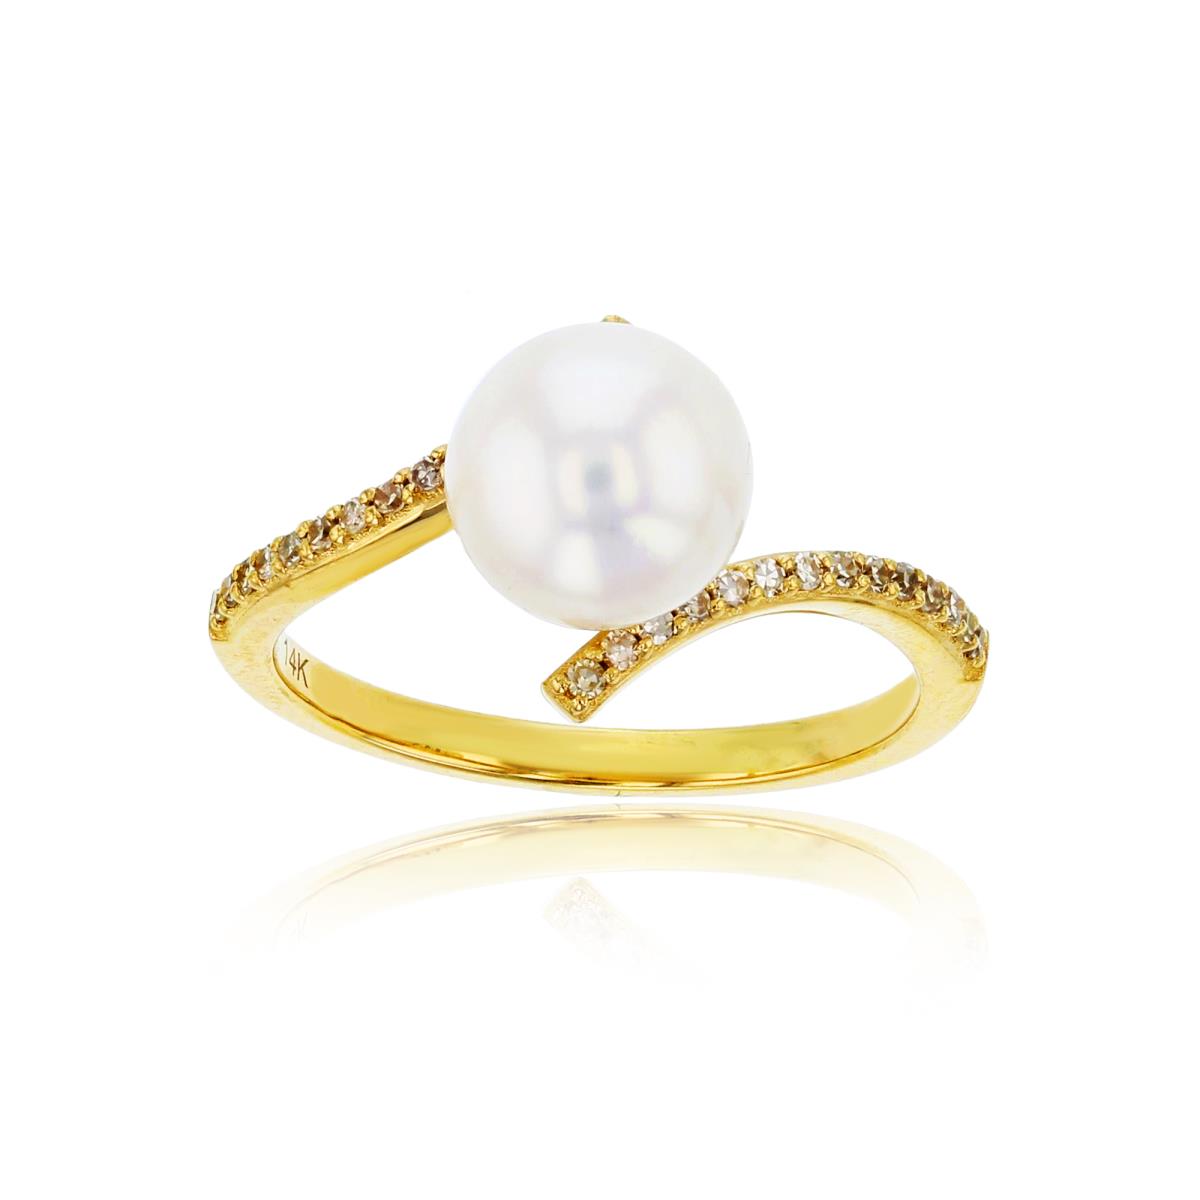 14K Yellow Gold 0.14 CTTW Rnd Diamonds & 8mm Rnd White Pearl Bypass Rows Ring